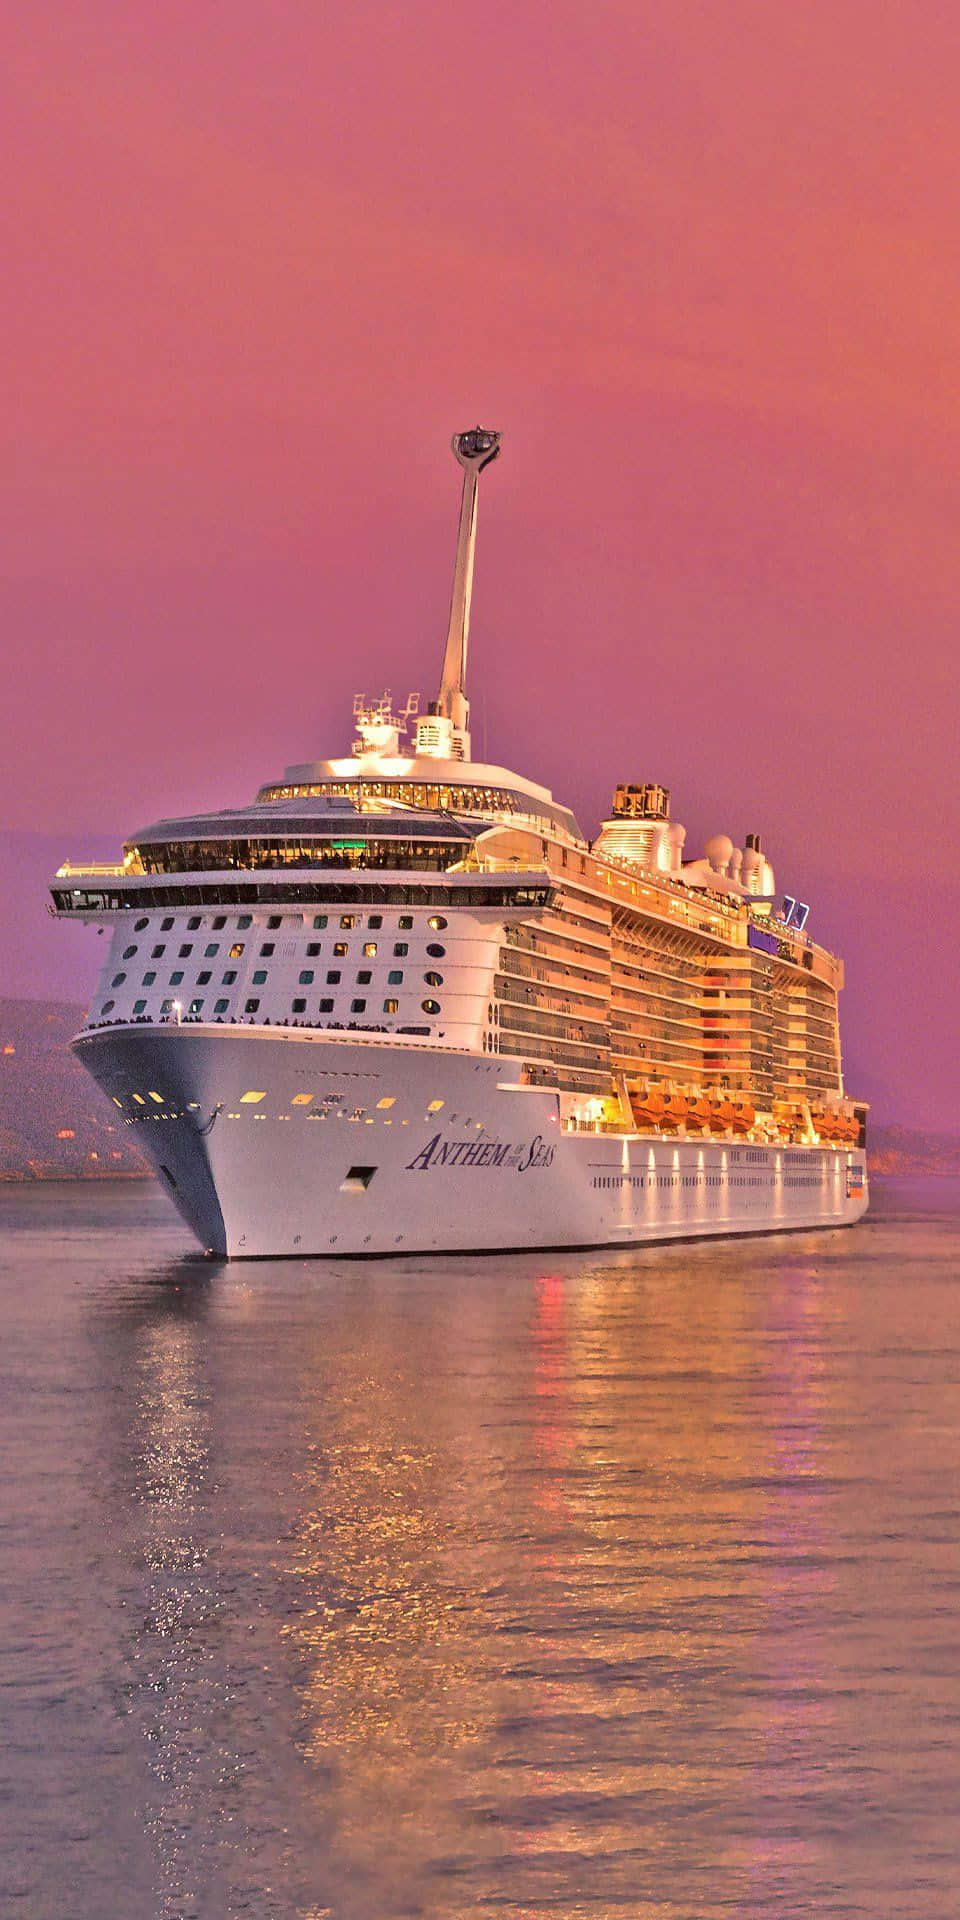 Cruise Ship Against Pink Sky Picture